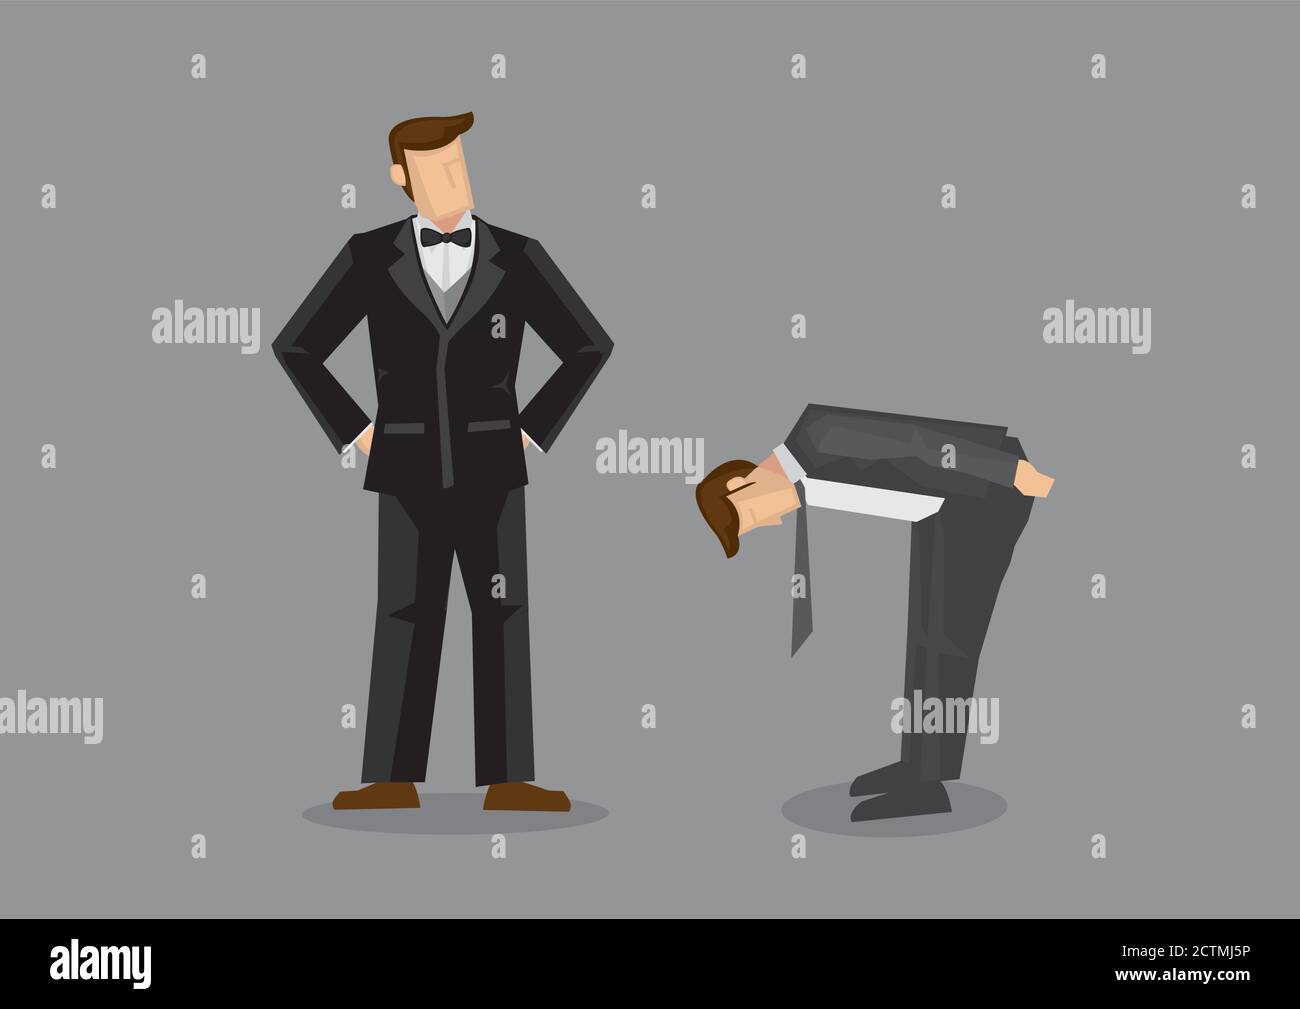 Cartoon man bending low and bowing to man wearing bow tie with hands on hips, representing high social status. Vector illustration of isolated grey ba Stock Vector